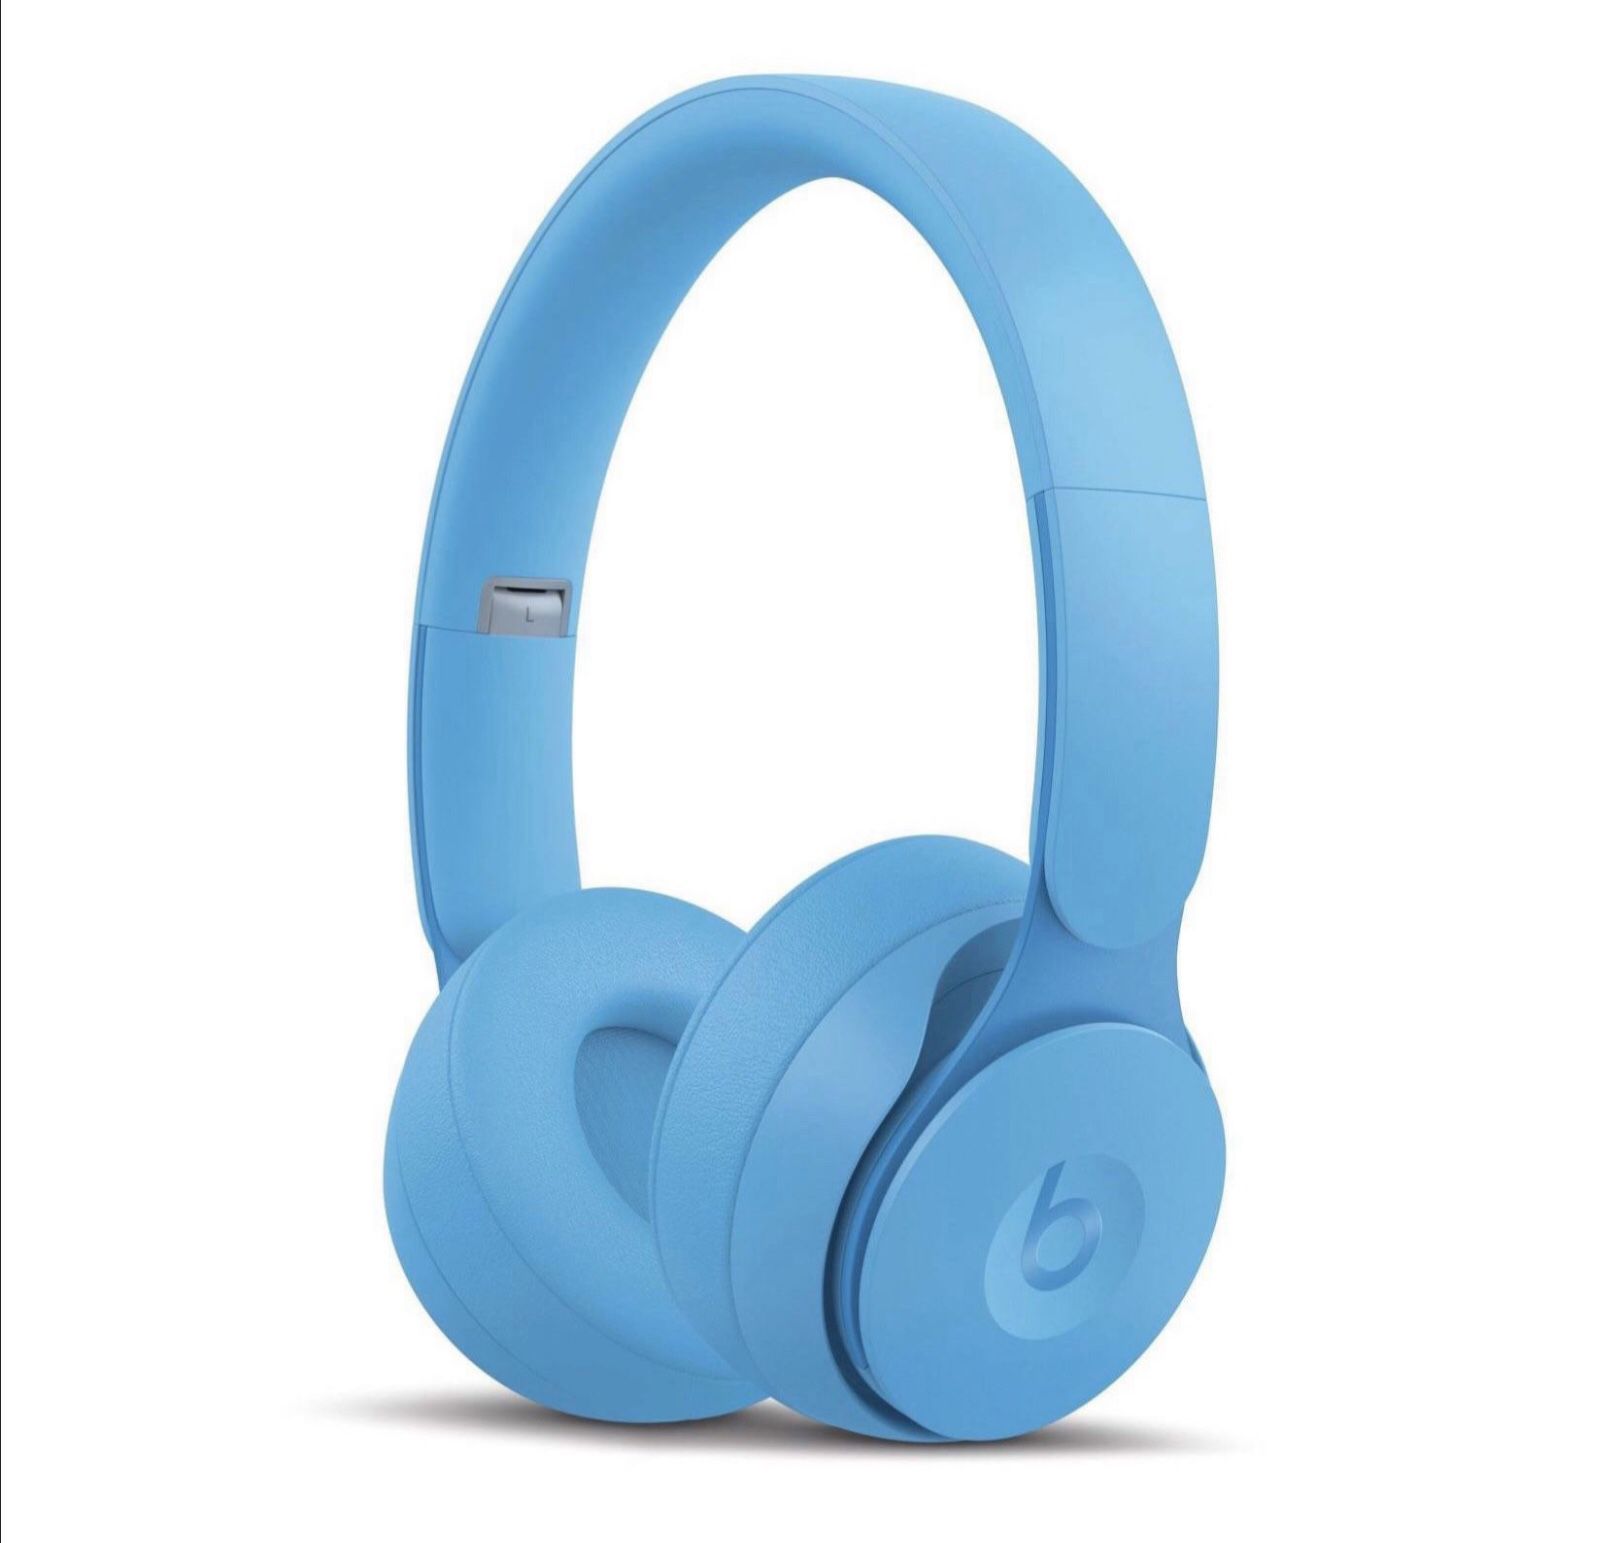 Brand New Beats Solo Pro Wireless Bluetooth Noise Cancelling On-Ear Headphones - Apple H1 Headphone Chip